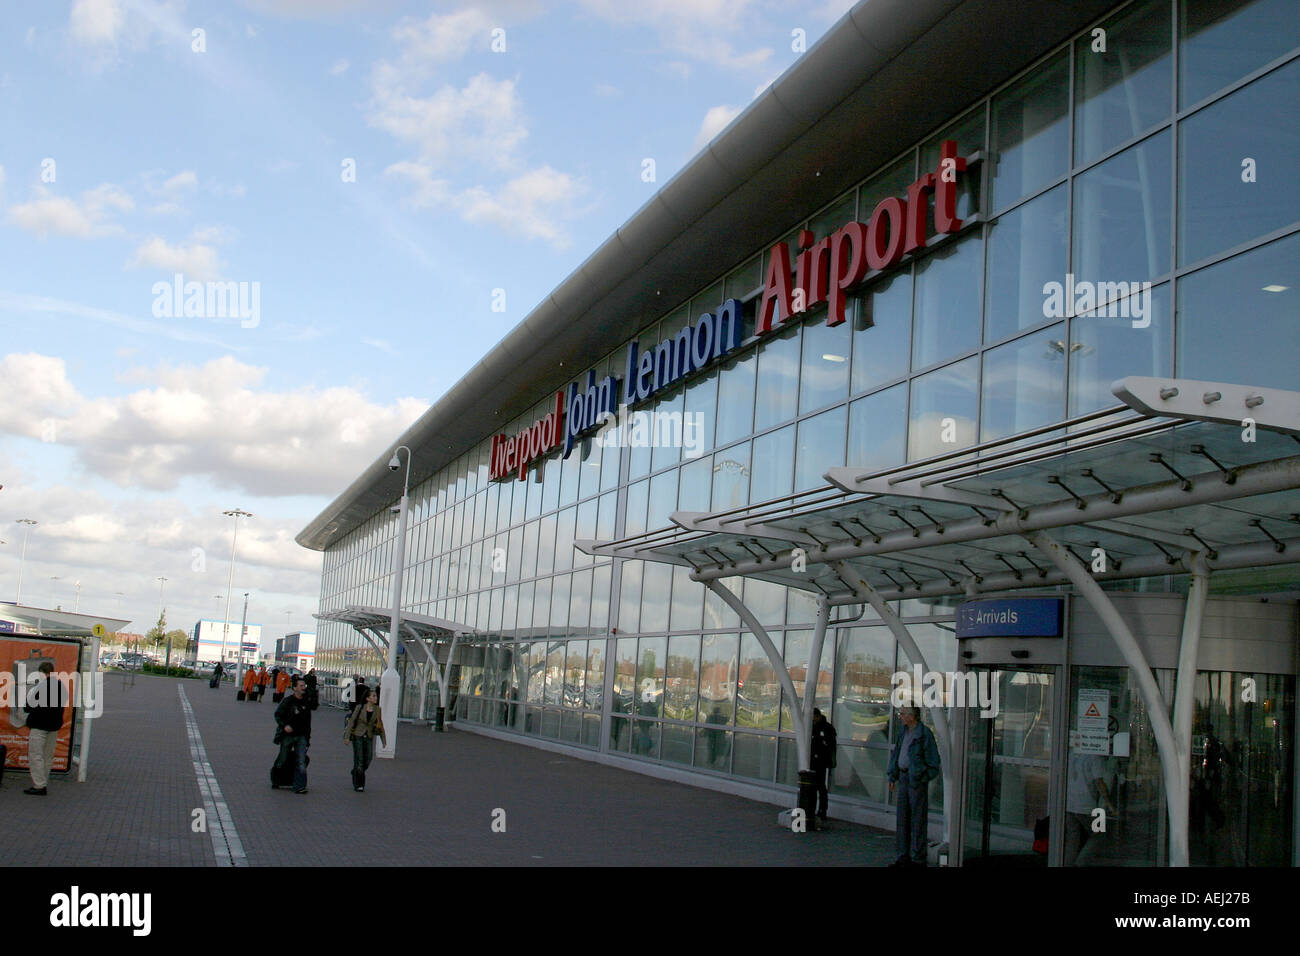 The Arrivals hall of the Liverpool John Lennon airport Stock Photo